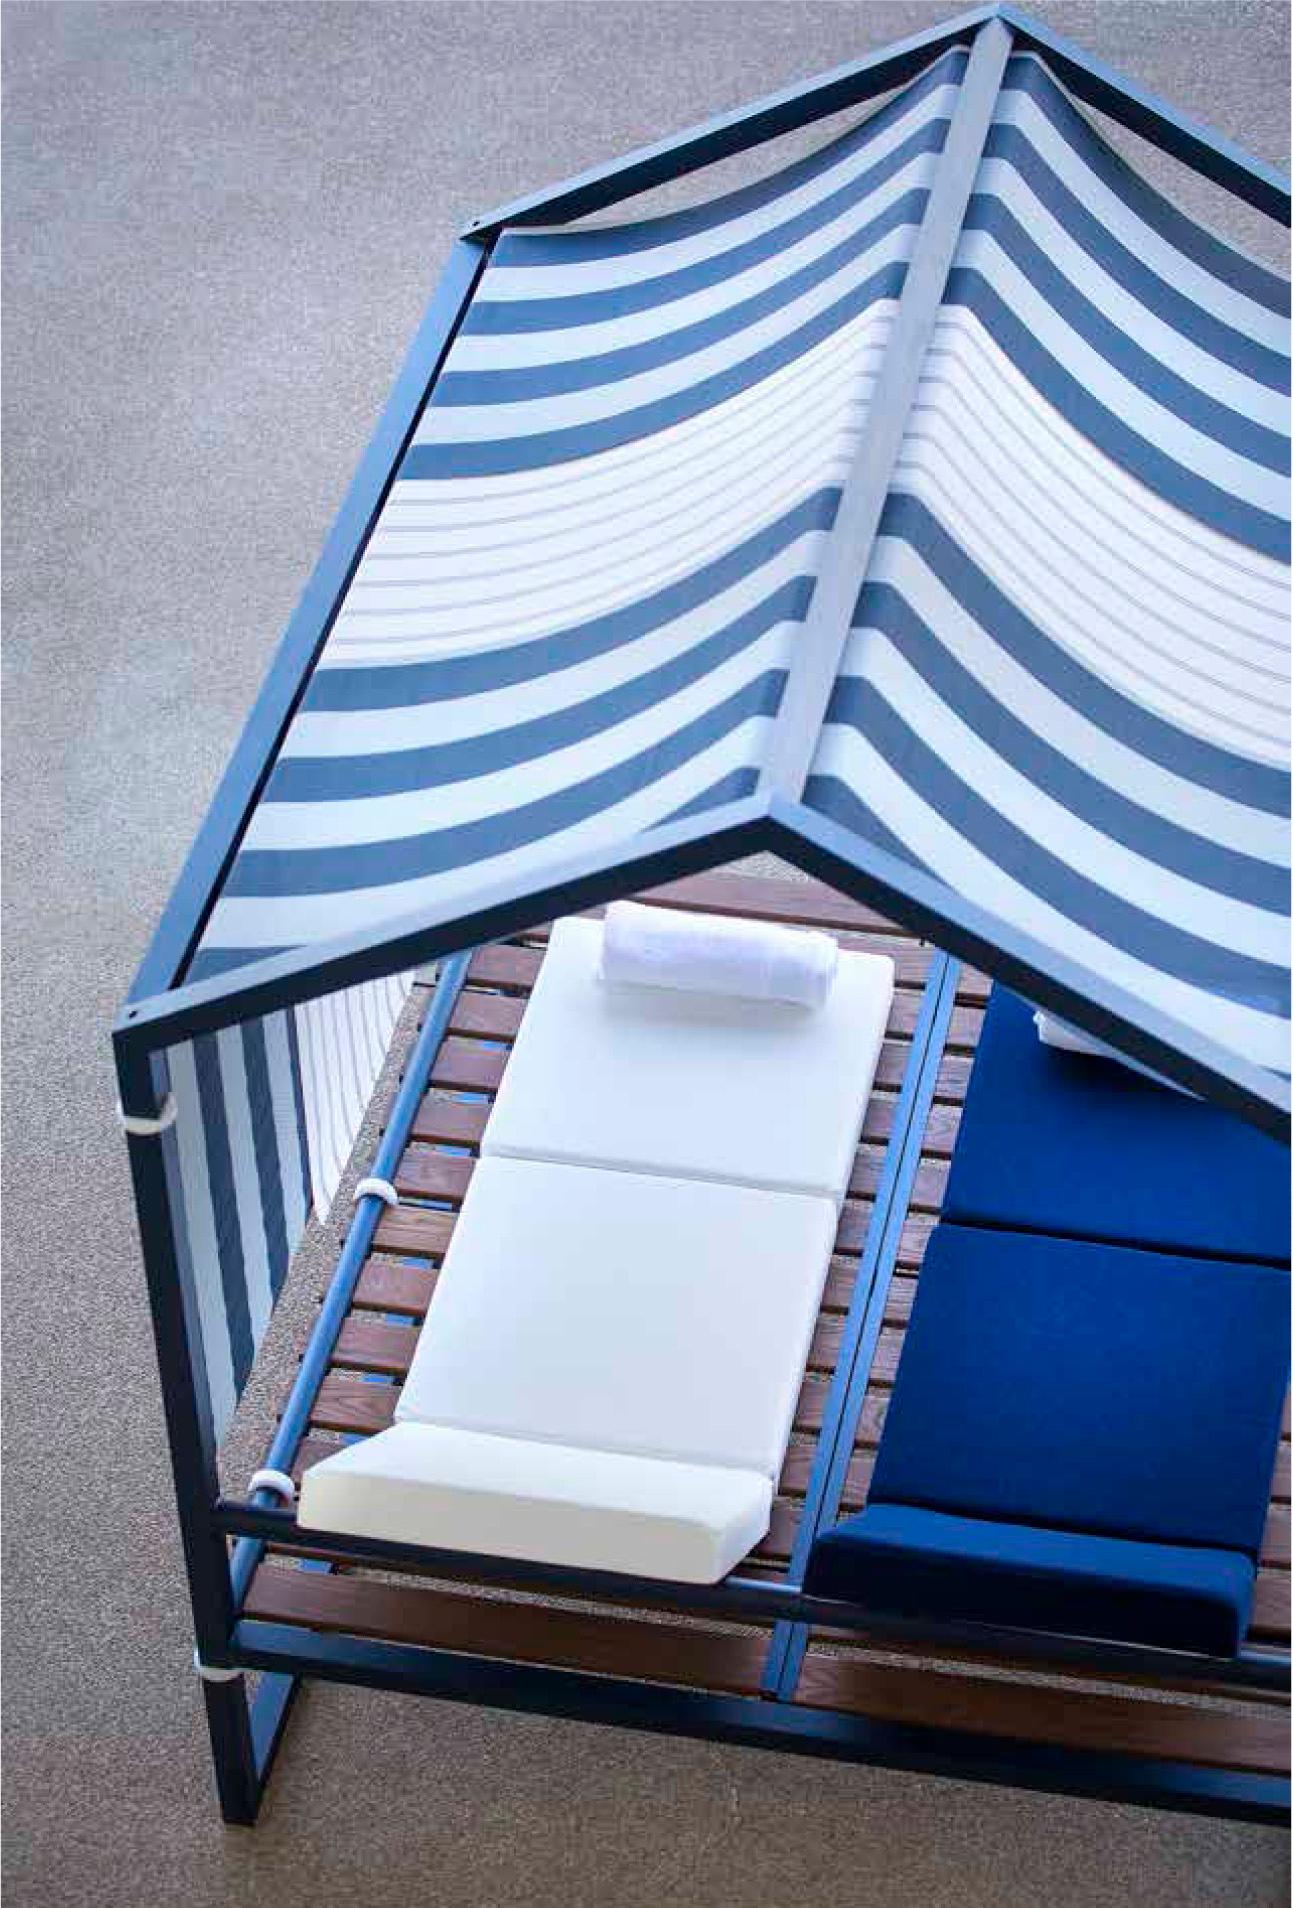 Like a contemporary vision of an emblematic waterfront figure, the Beach Nested Cabins revisit the traditional concept of beach houses and become an outdoor furniture, playful and friendly. The roof panels are adjustable which gives you the option